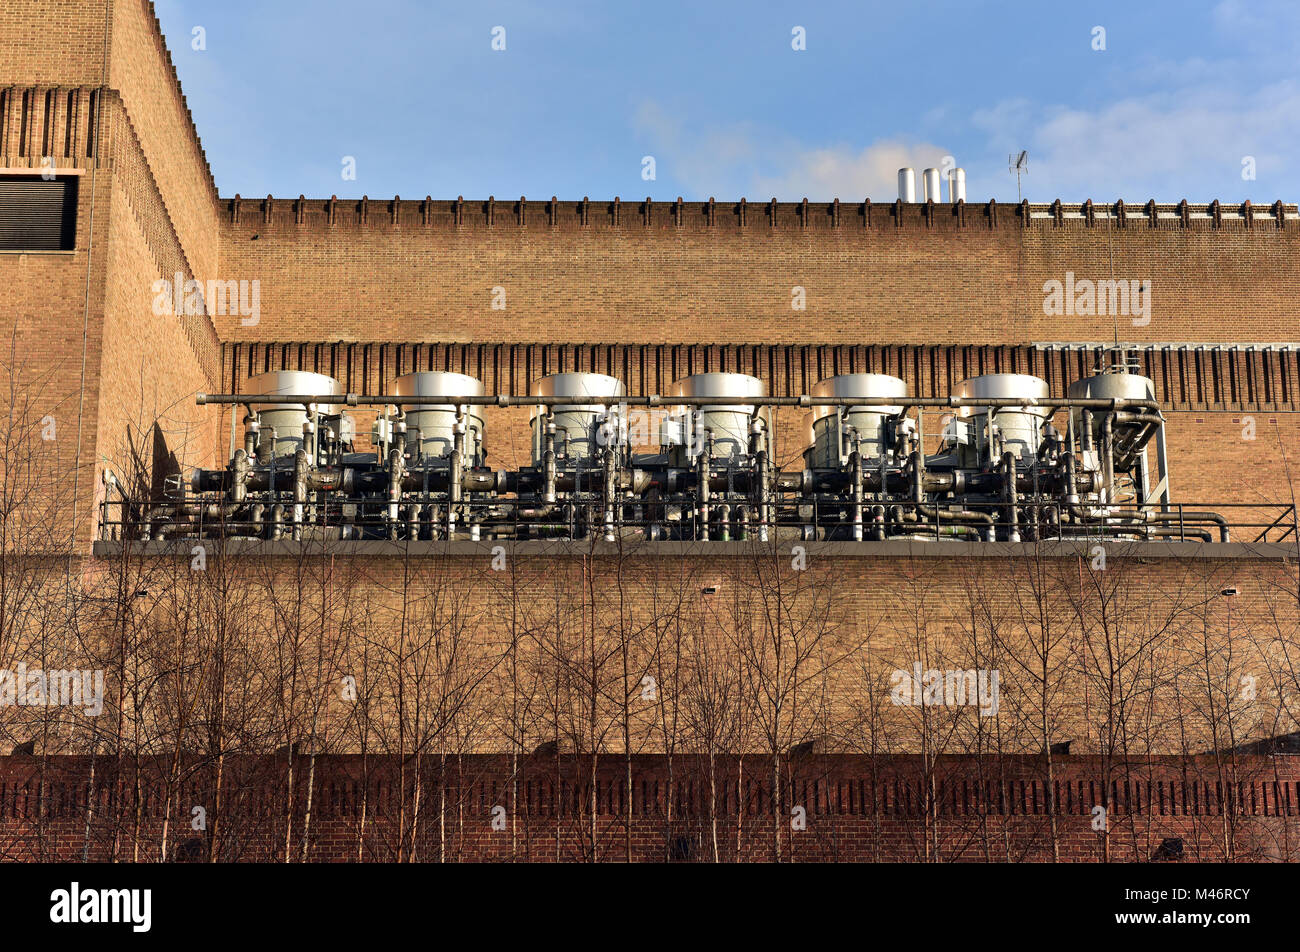 Electrical power generating or generation breakers and transformers outside of a large industrial building in a row or line producing electricity. Stock Photo